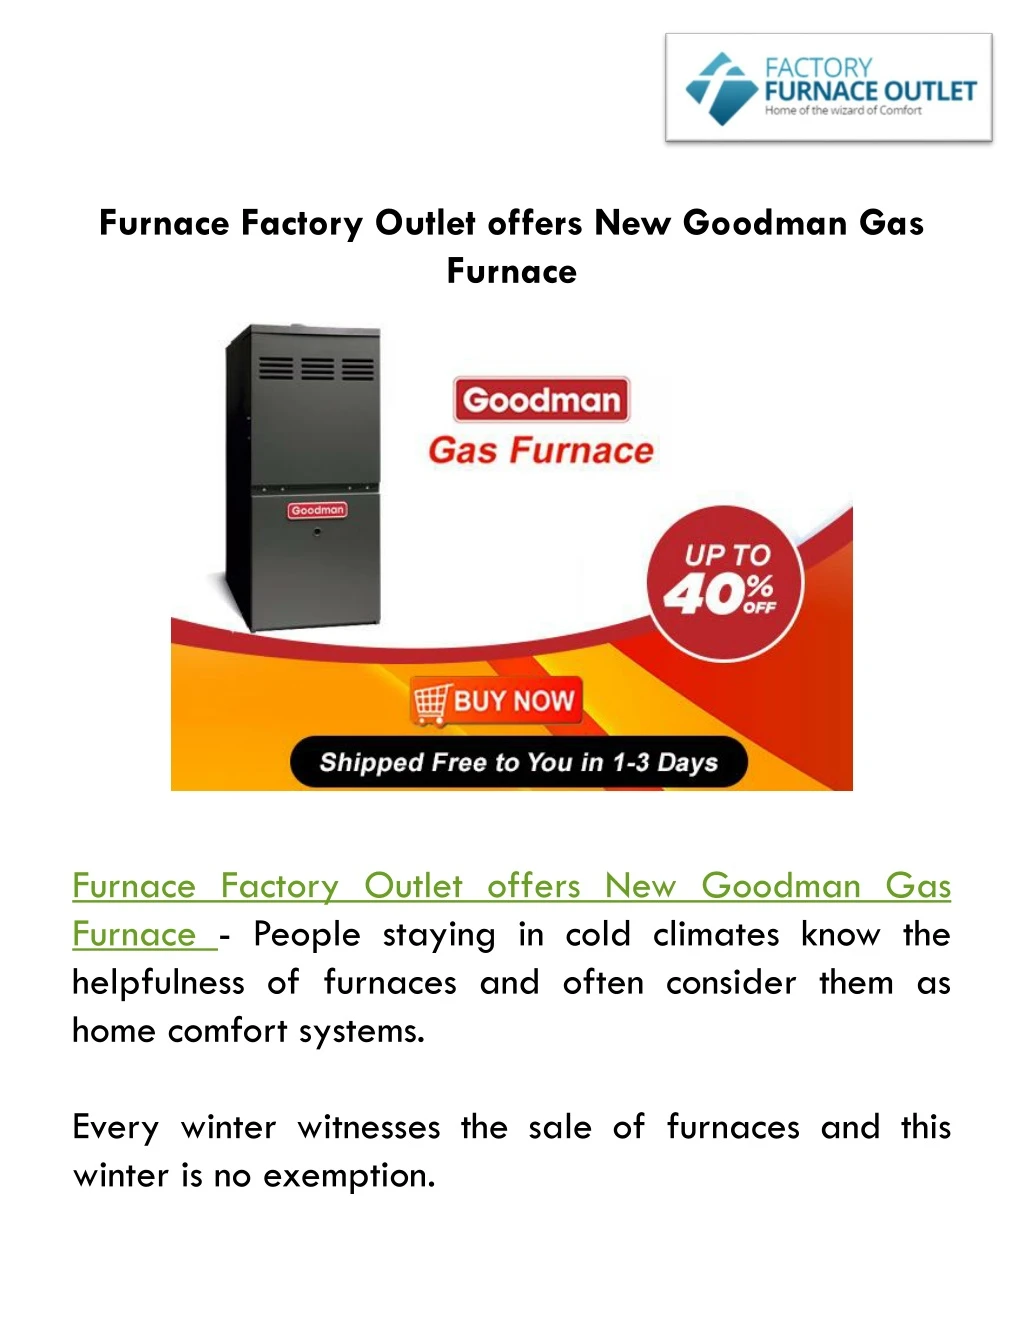 furnace factory outlet offers new goodman